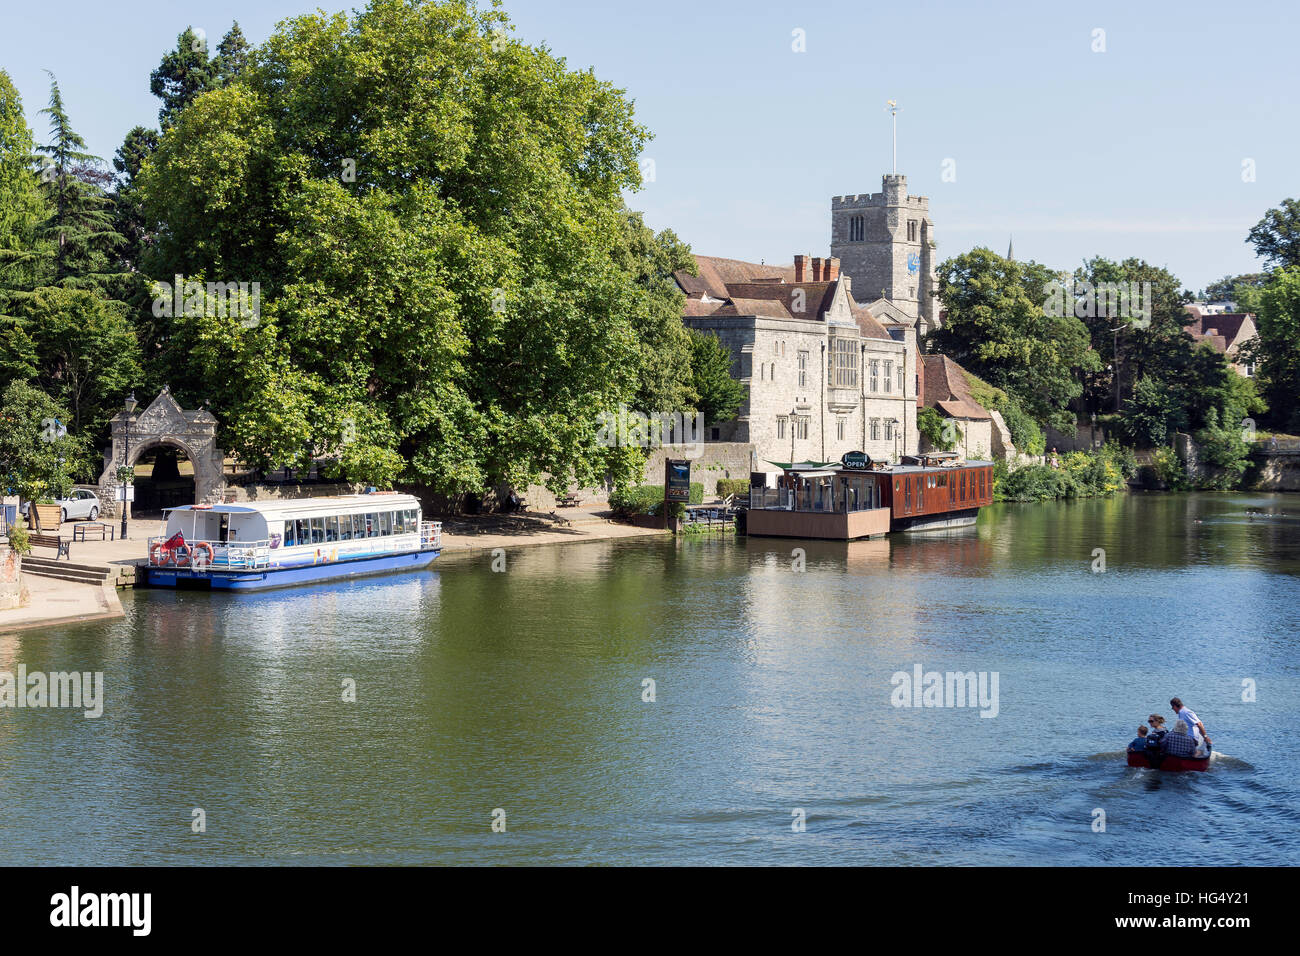 Riverside showing The Archbishop’s Palace, River Medway, Maidstone, Kent, England, United Kingdom Stock Photo